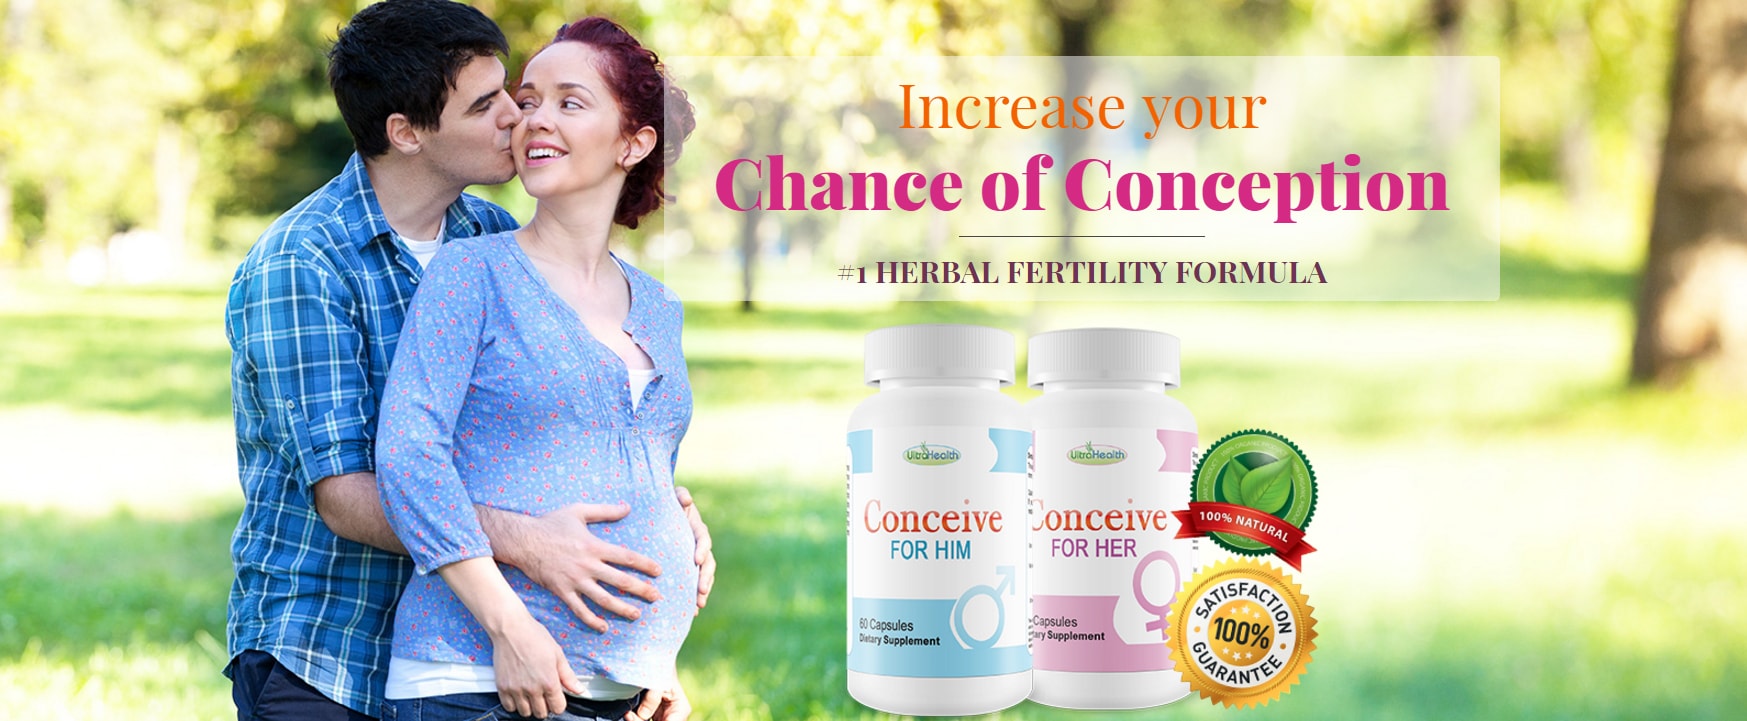 Conceive Easy Fertility Pills In UK